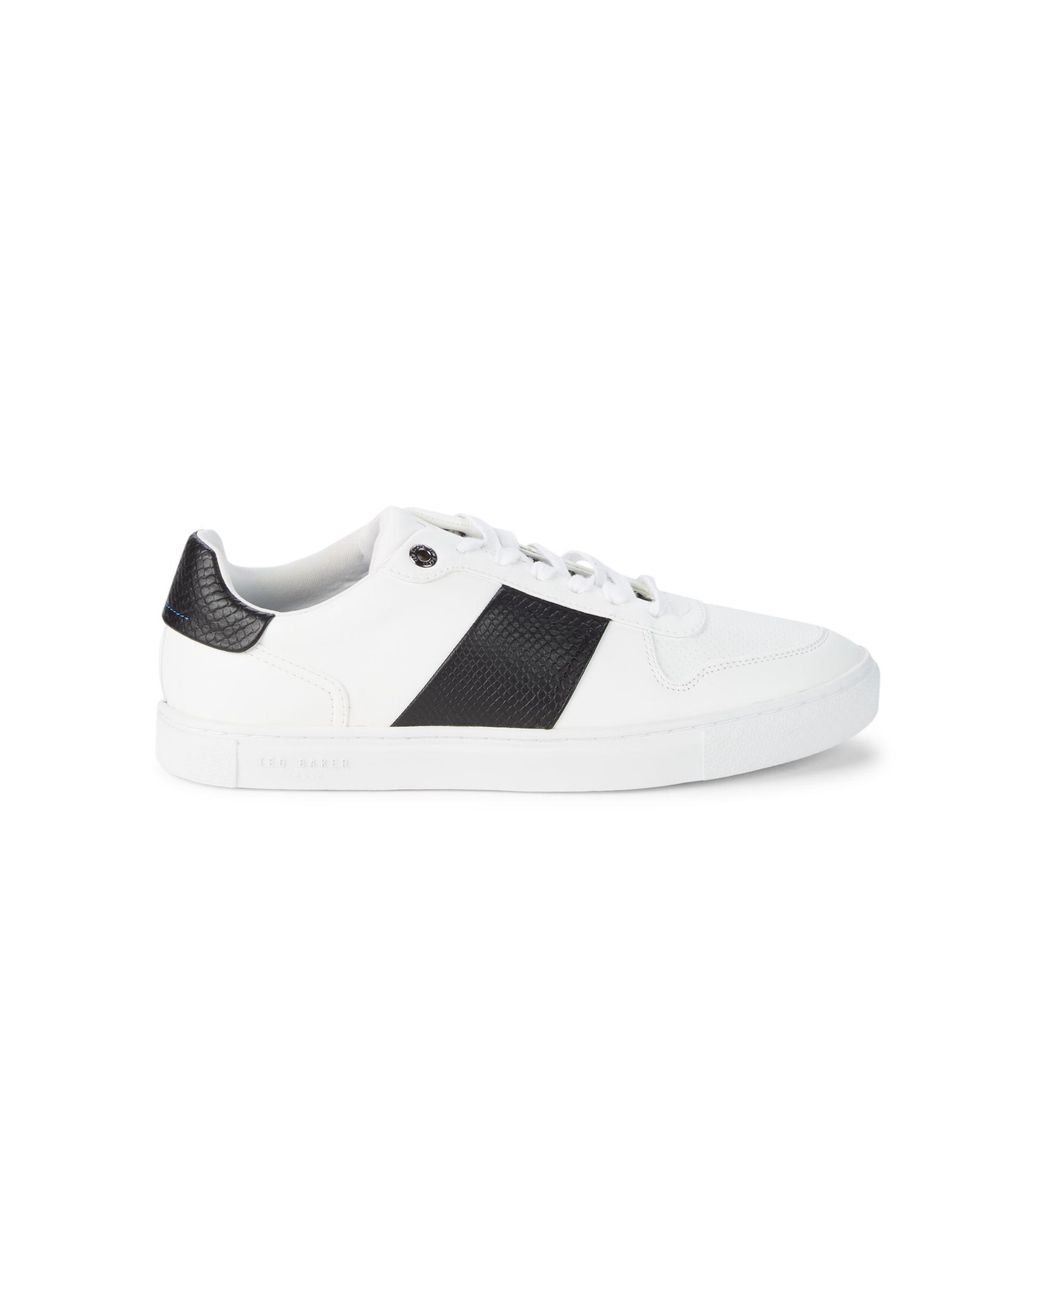 Ted Baker Two-tone Leather Trainers in White for Men - Lyst